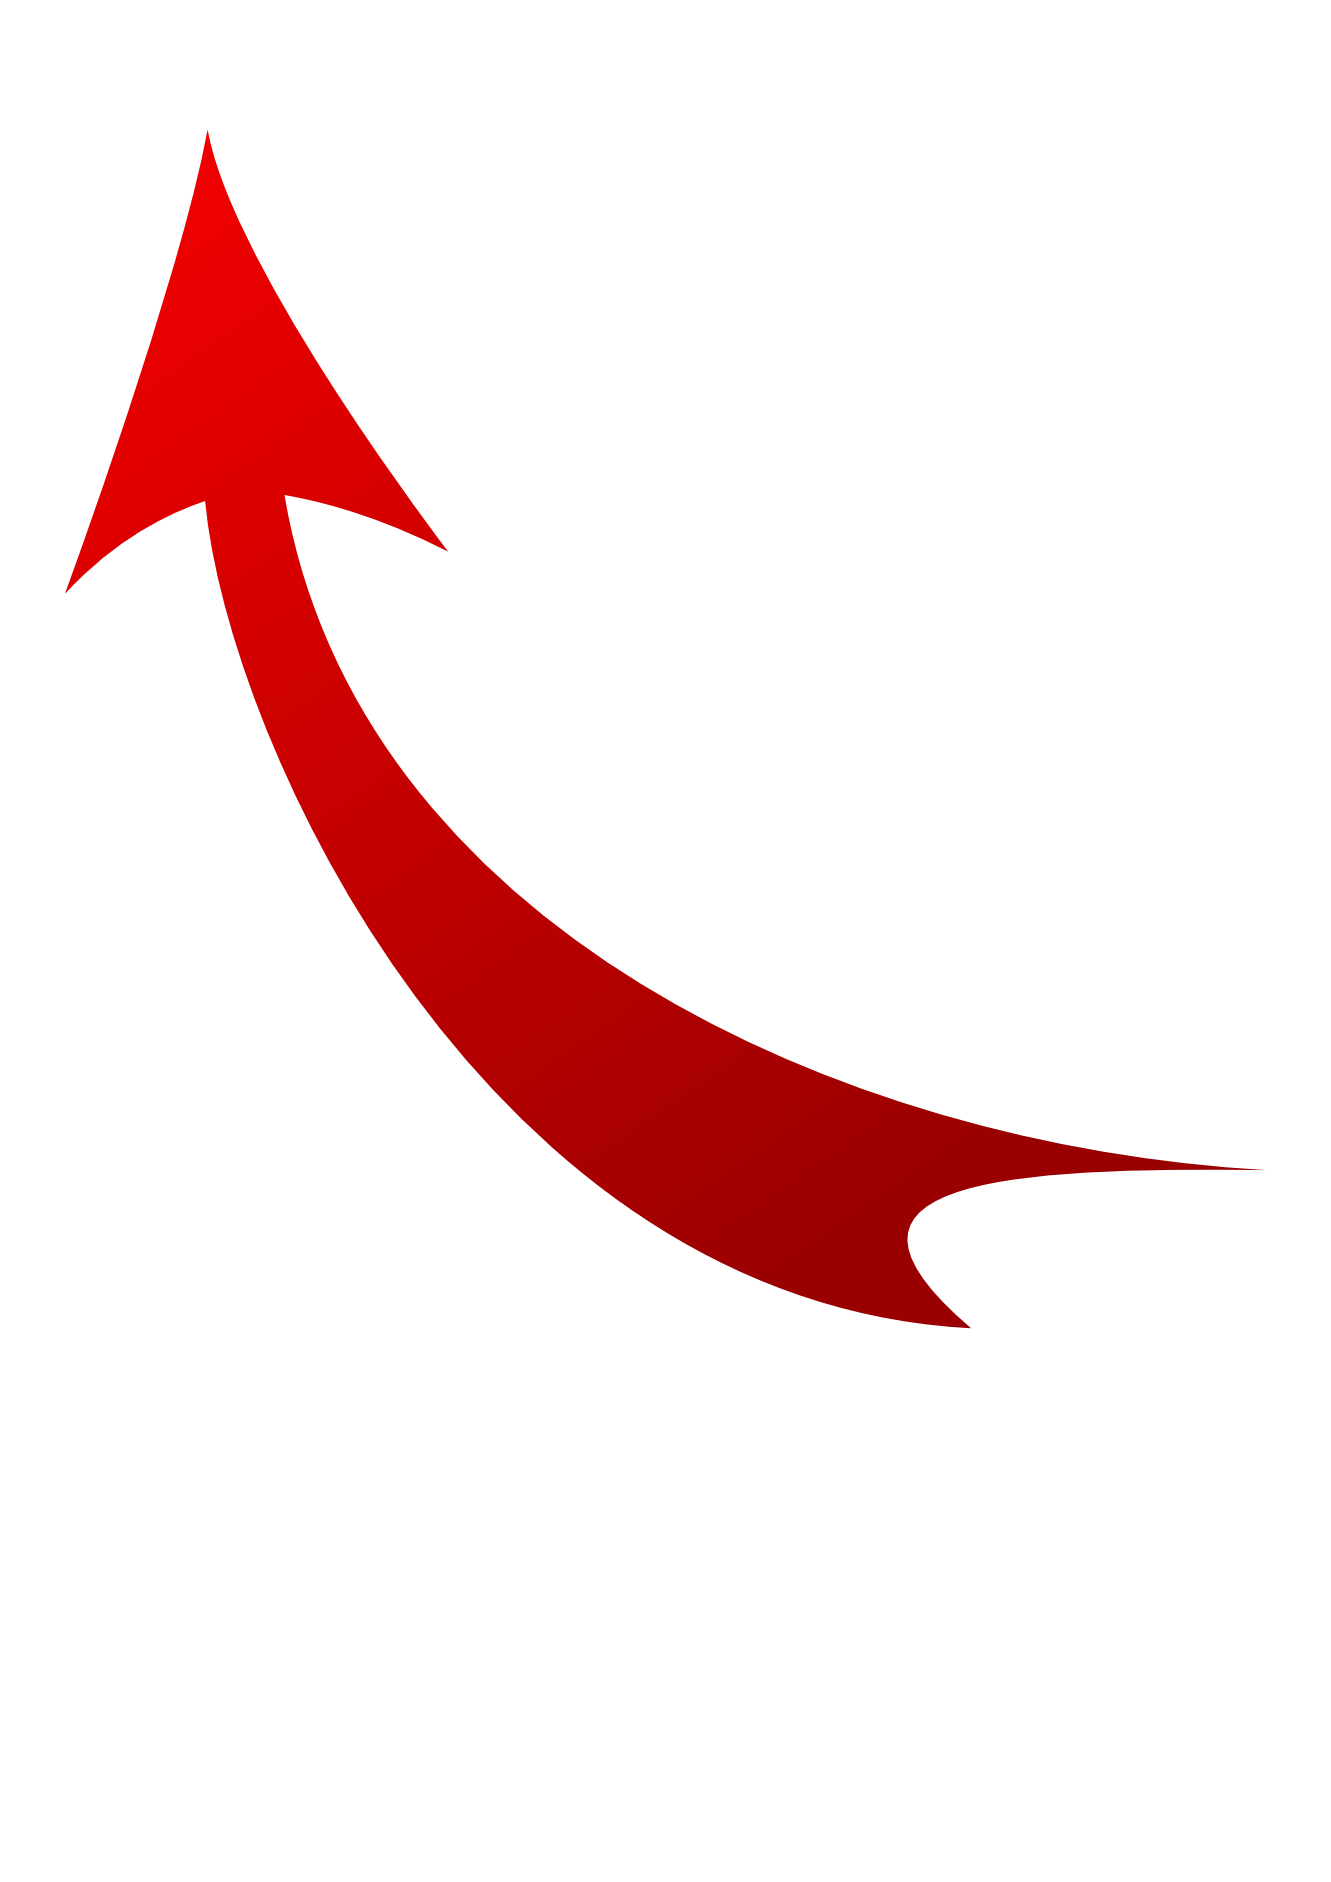 Red Arrow PNG Background Image